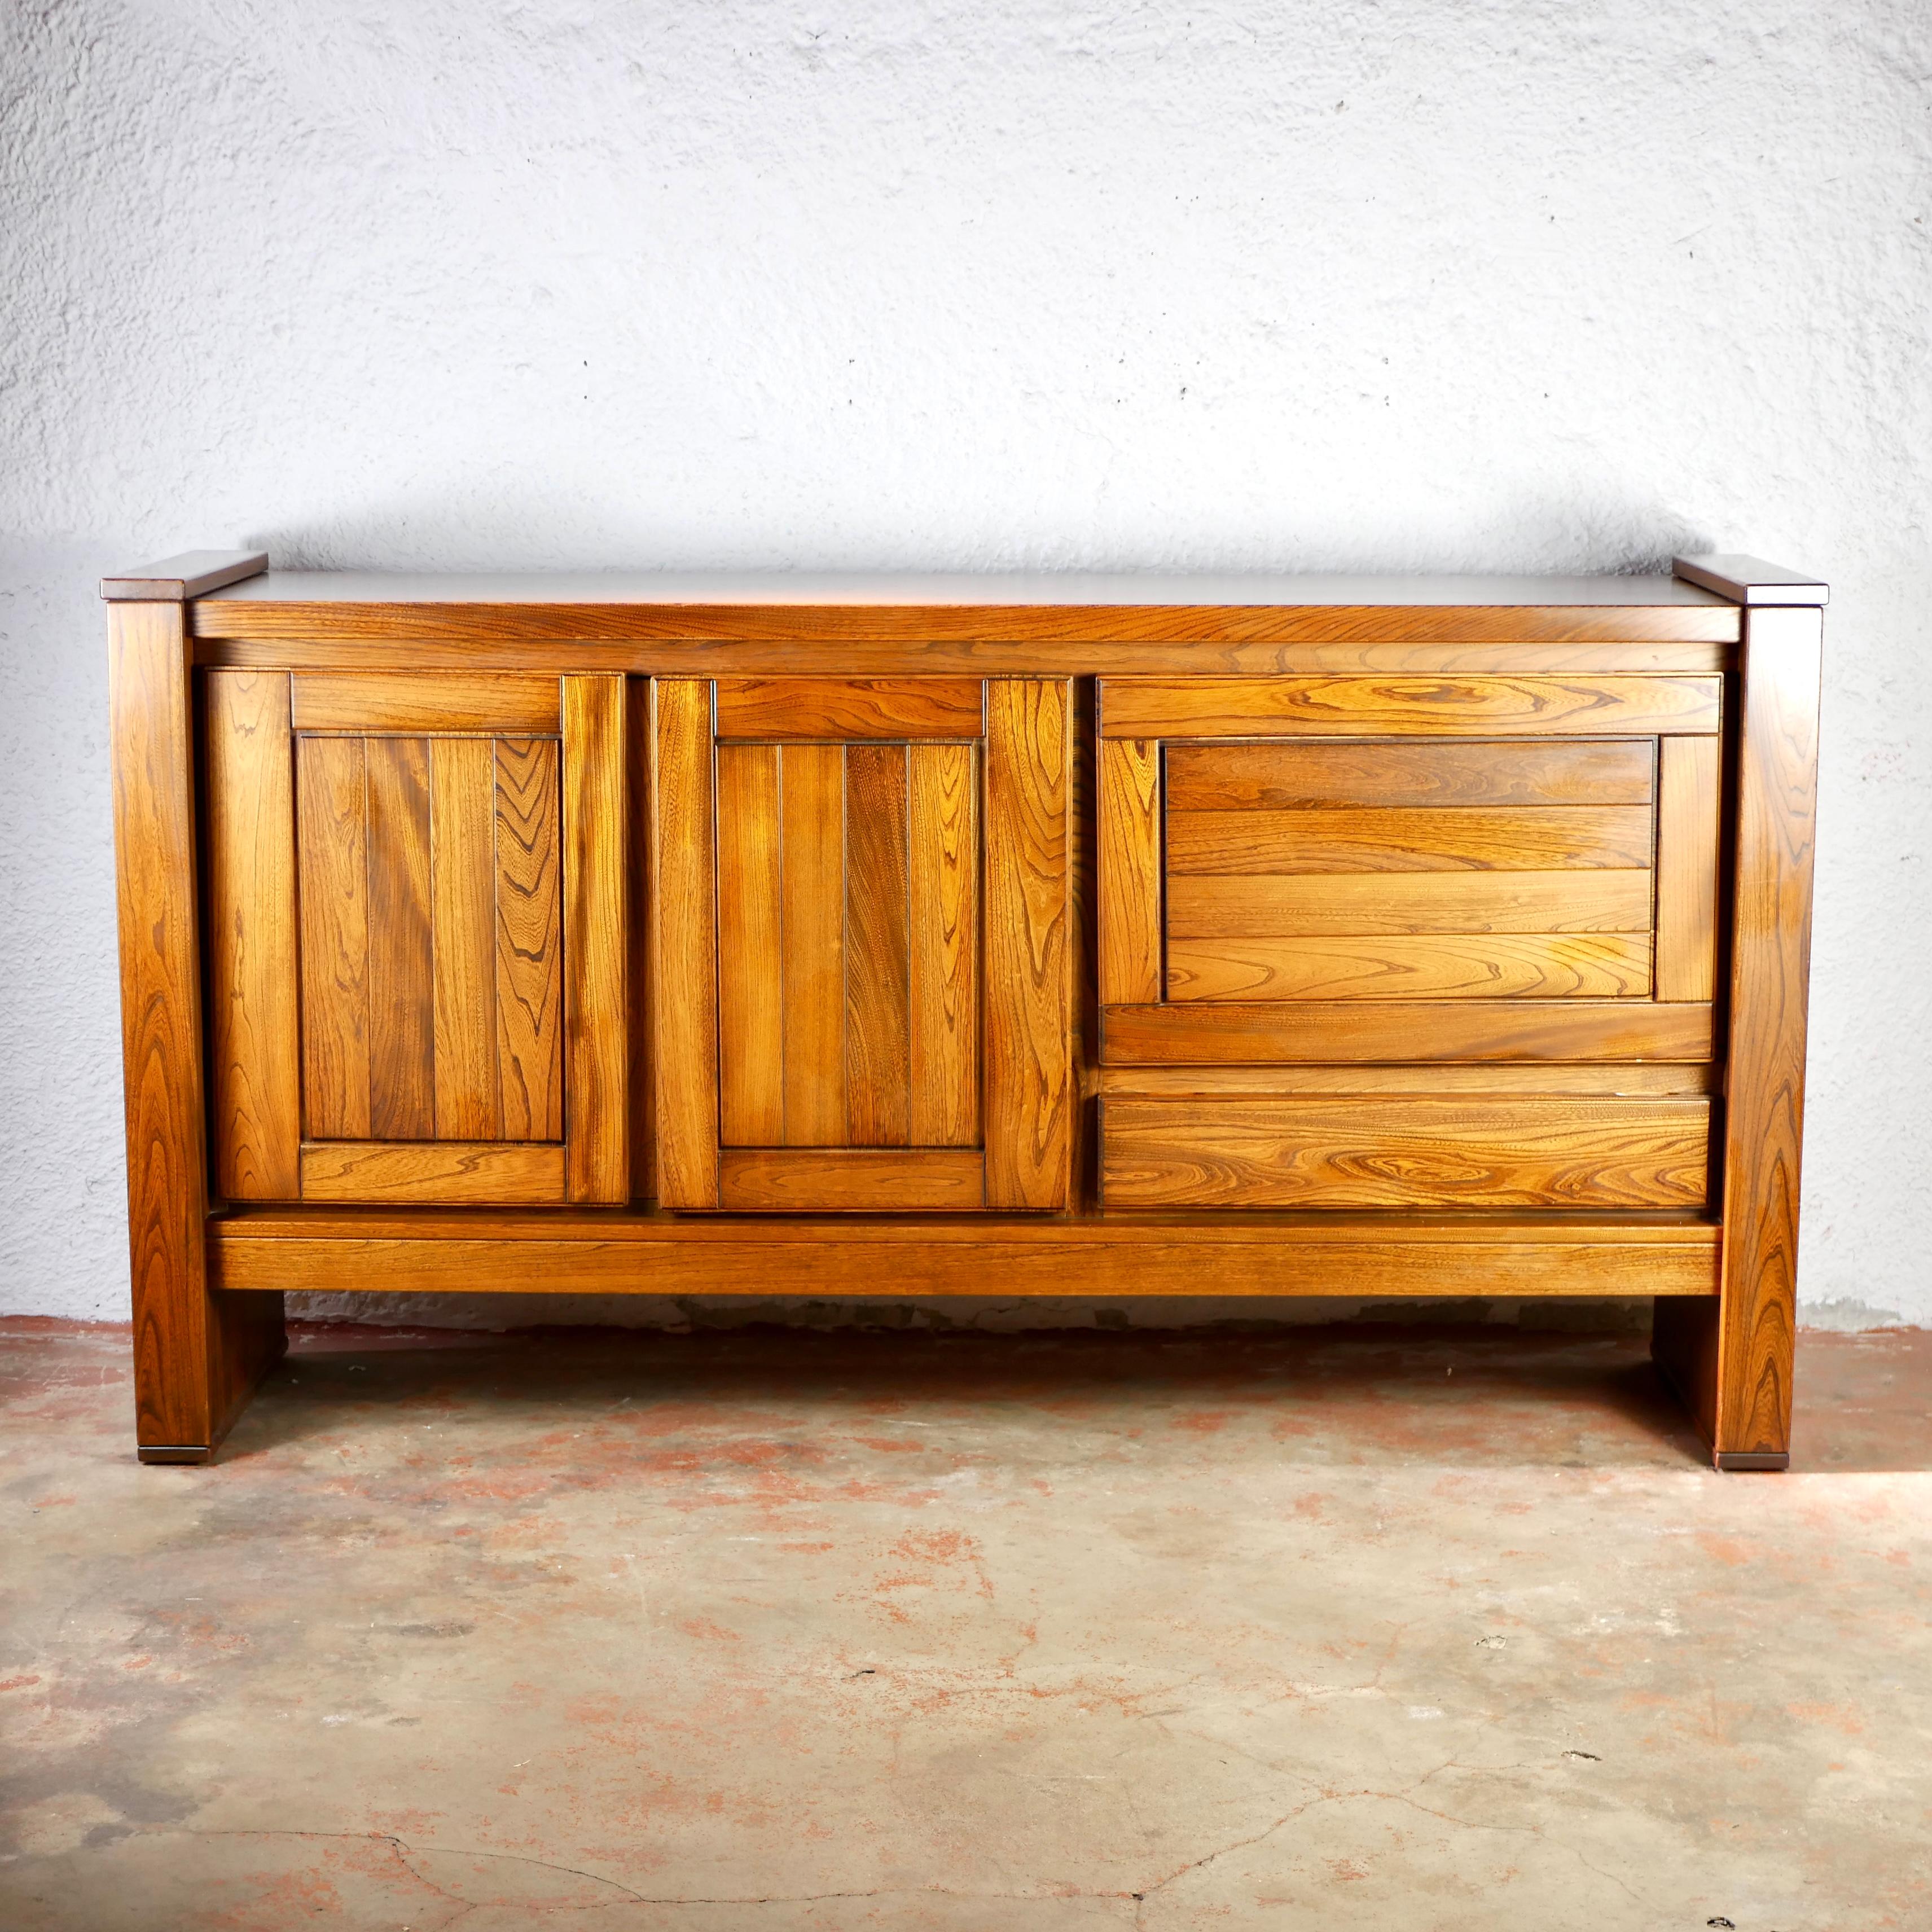 Gorgeous buffet or high sideboard in solid French elm wood, attributed to Maison Regain, from the 1980s
Beautiful elm tint, high quality fabrication and details, really sturdy and in very good condition.
One buffet side with 1 shelf, one side to